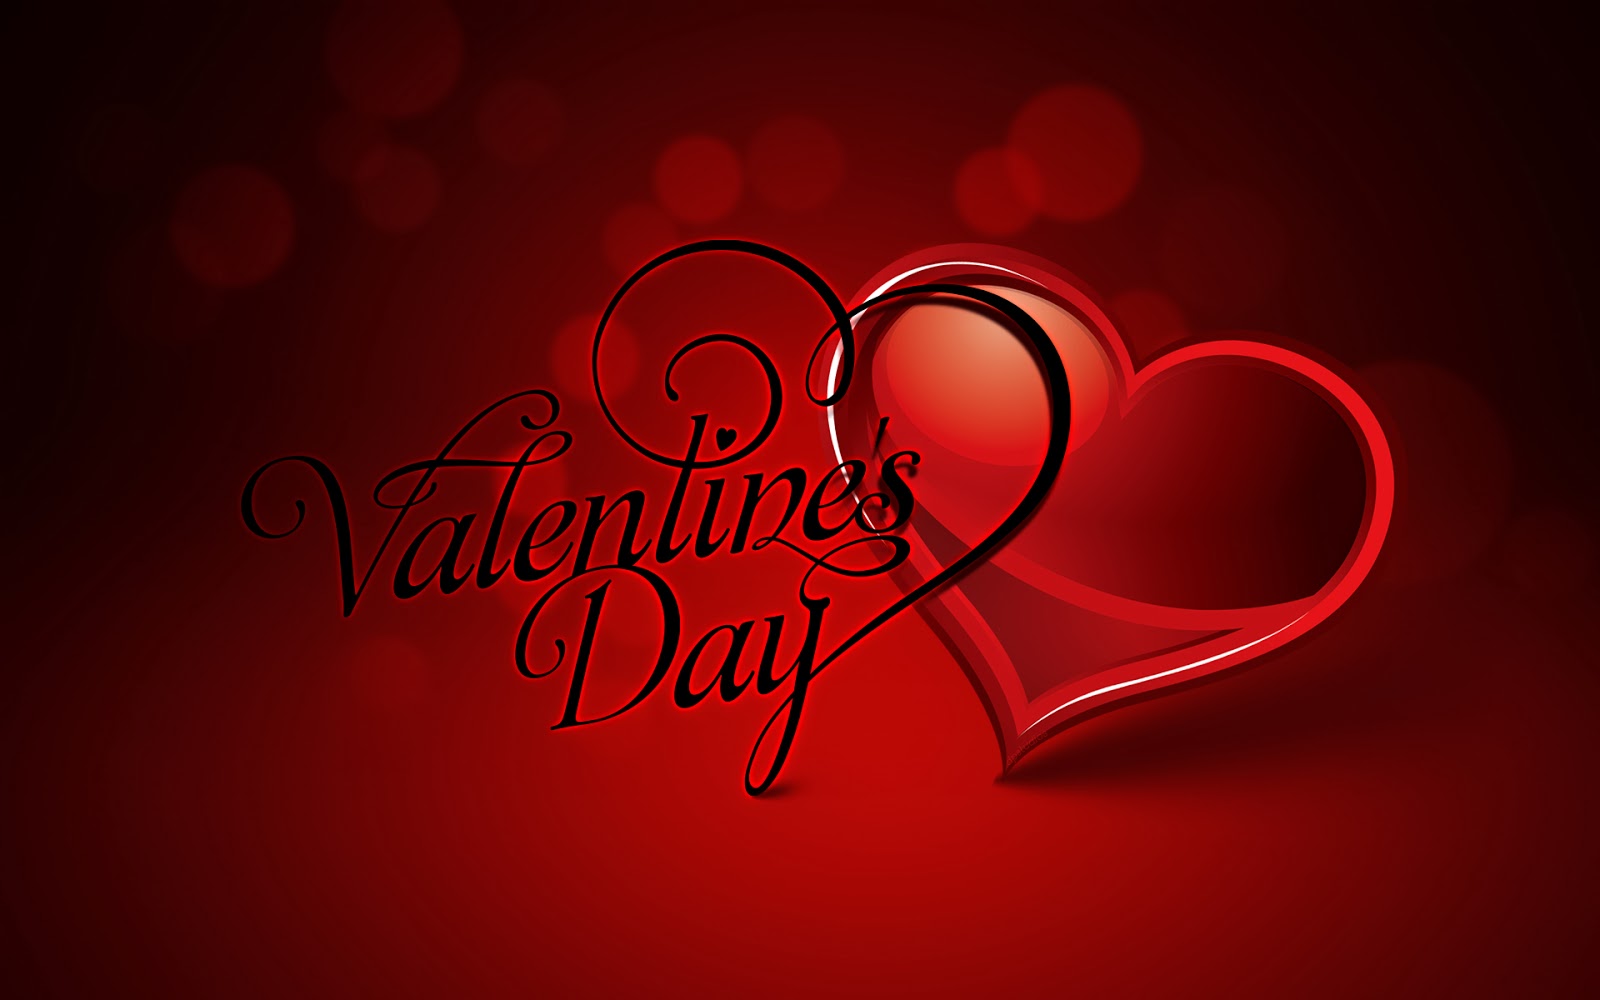 Happy Valentine's Day 2020 HD Pictures, Images, Wallpapers, 4K ...